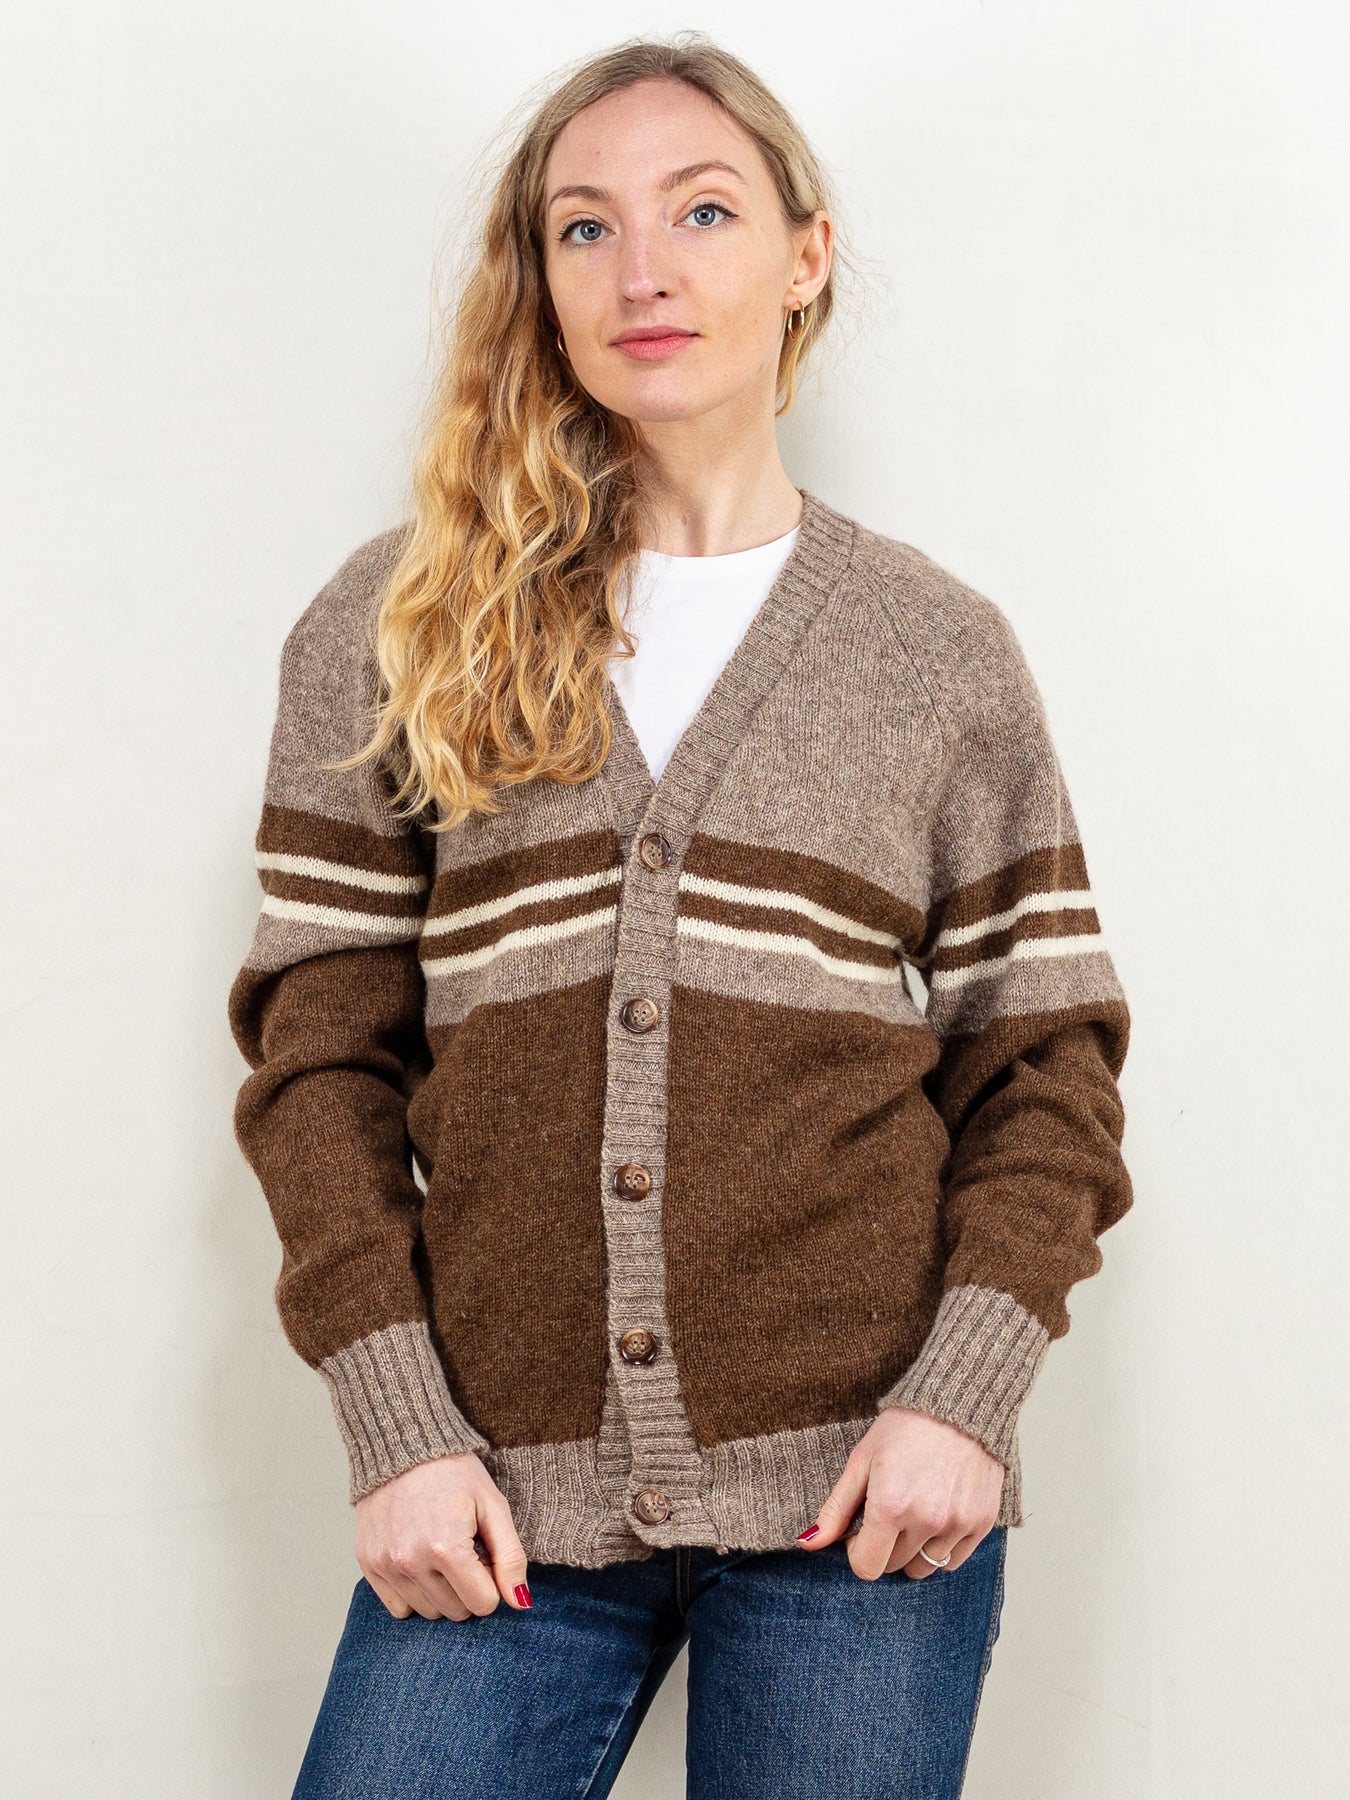 Online Vintage Store | 70's Women Cable Knit Cardigan in Cream